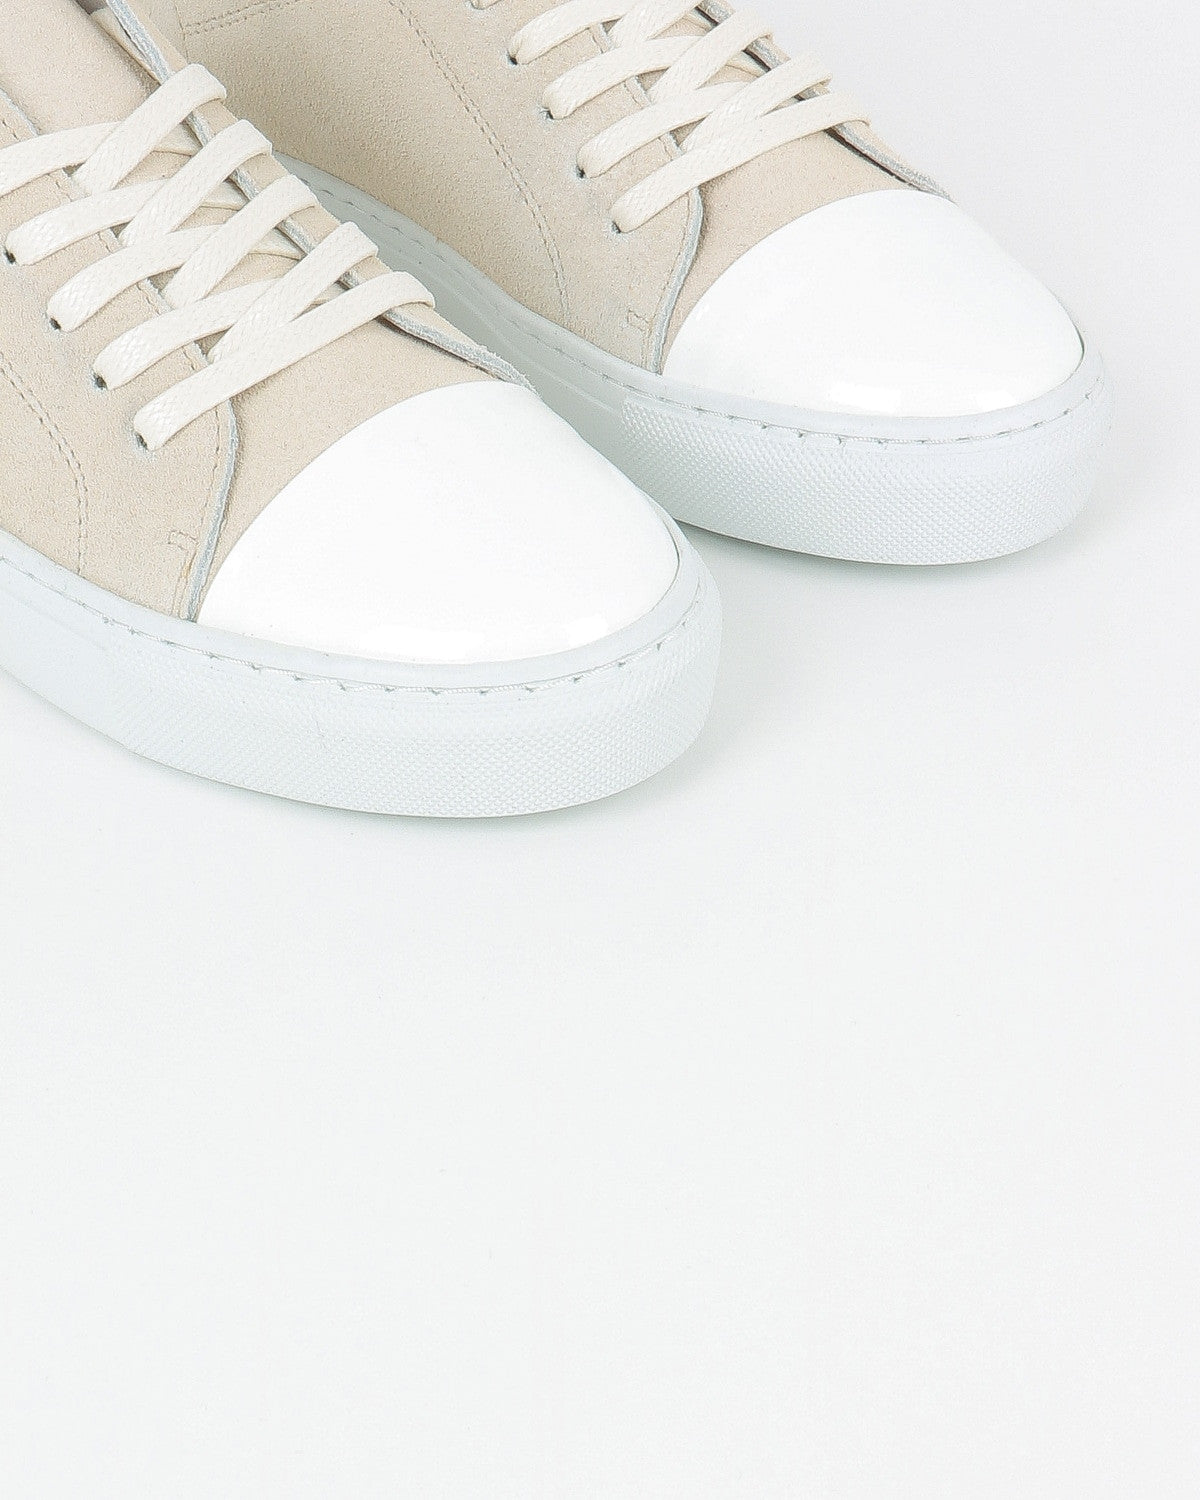 garment project_classic lace sneaker_offwhite suede_view_4_4